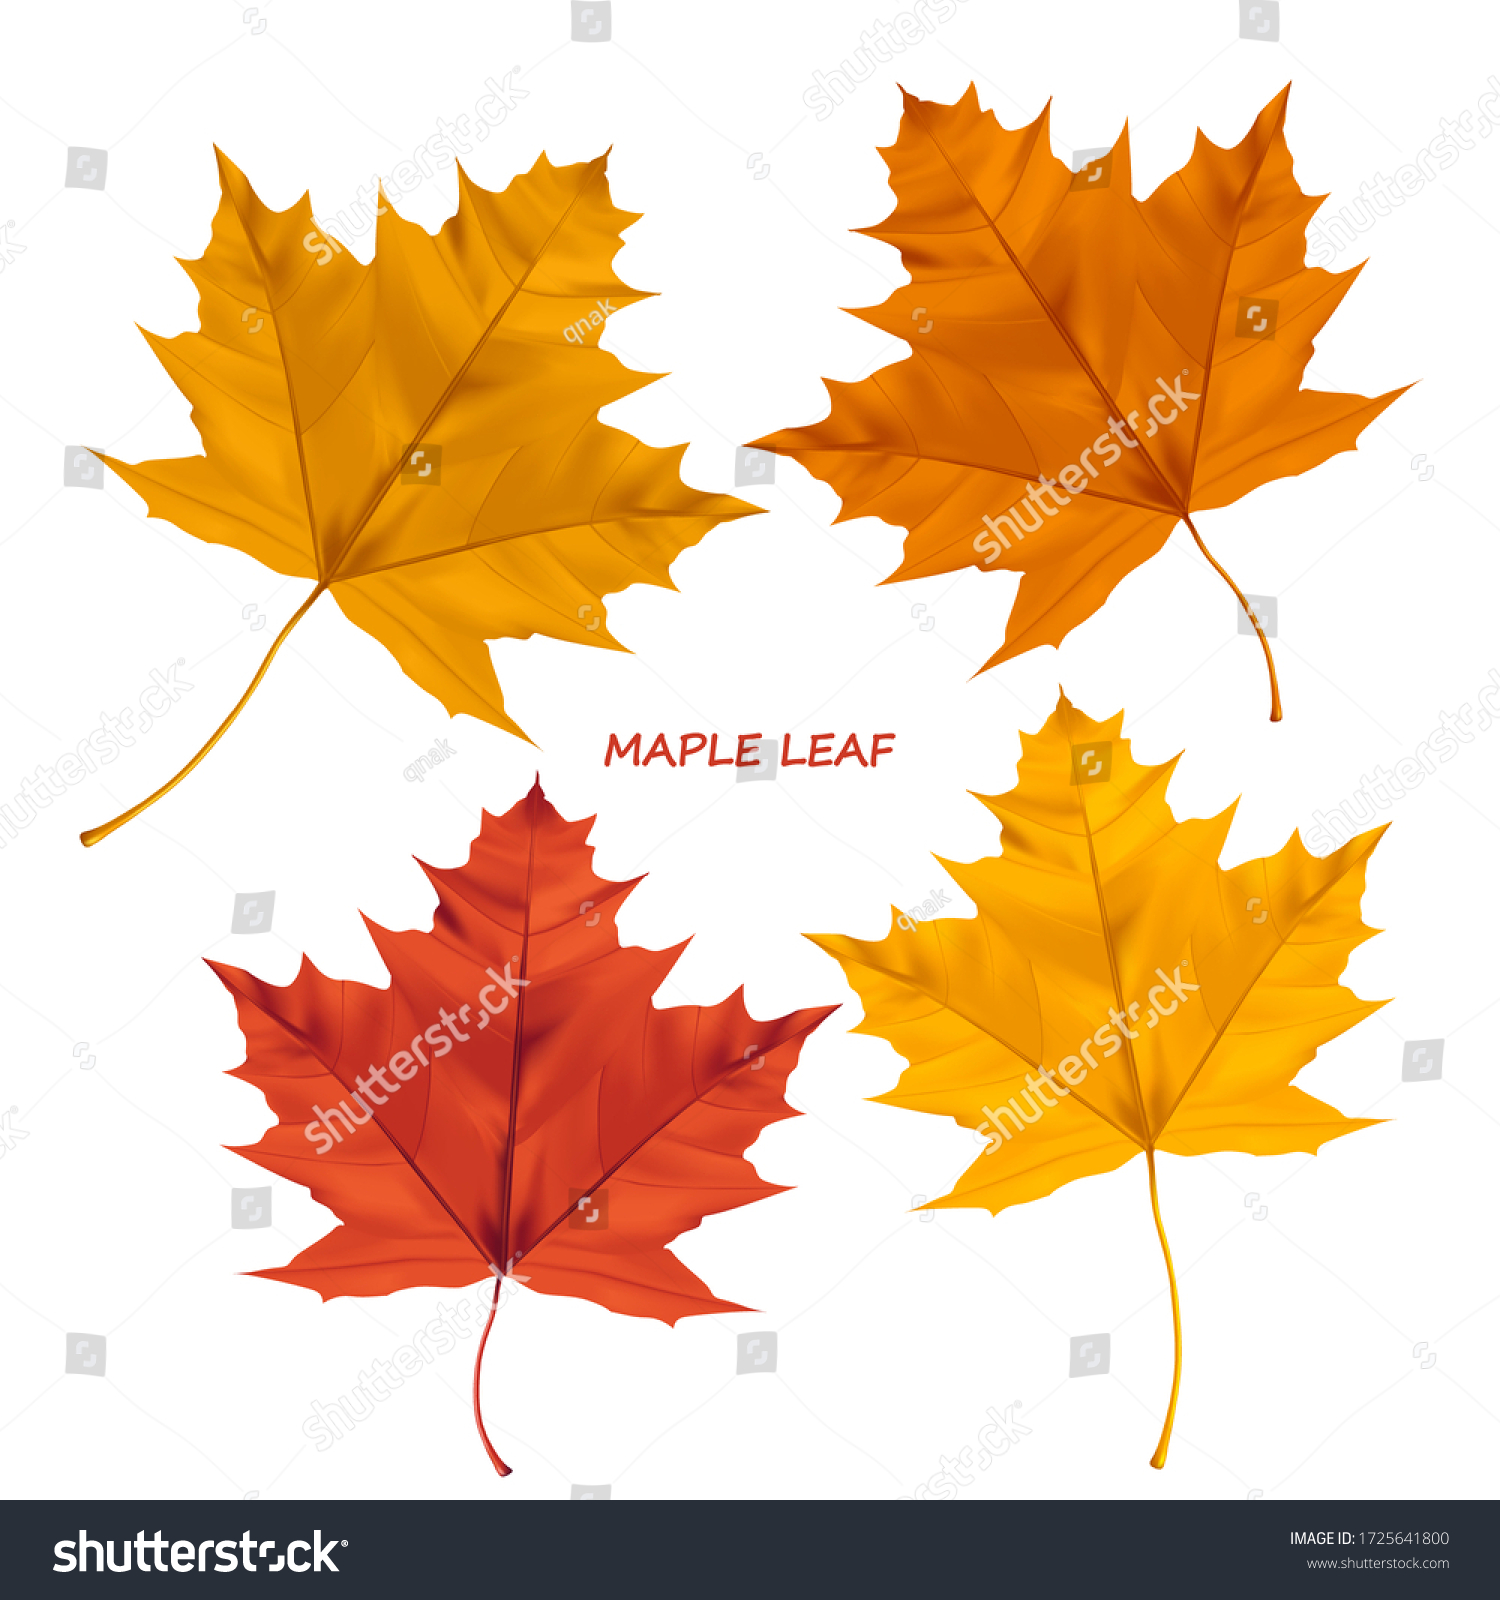 Set of realistic maple leaves isolated on a white background. Autumn maple tree leaf for the design of greeting cards, holiday banners, and posters. #1725641800